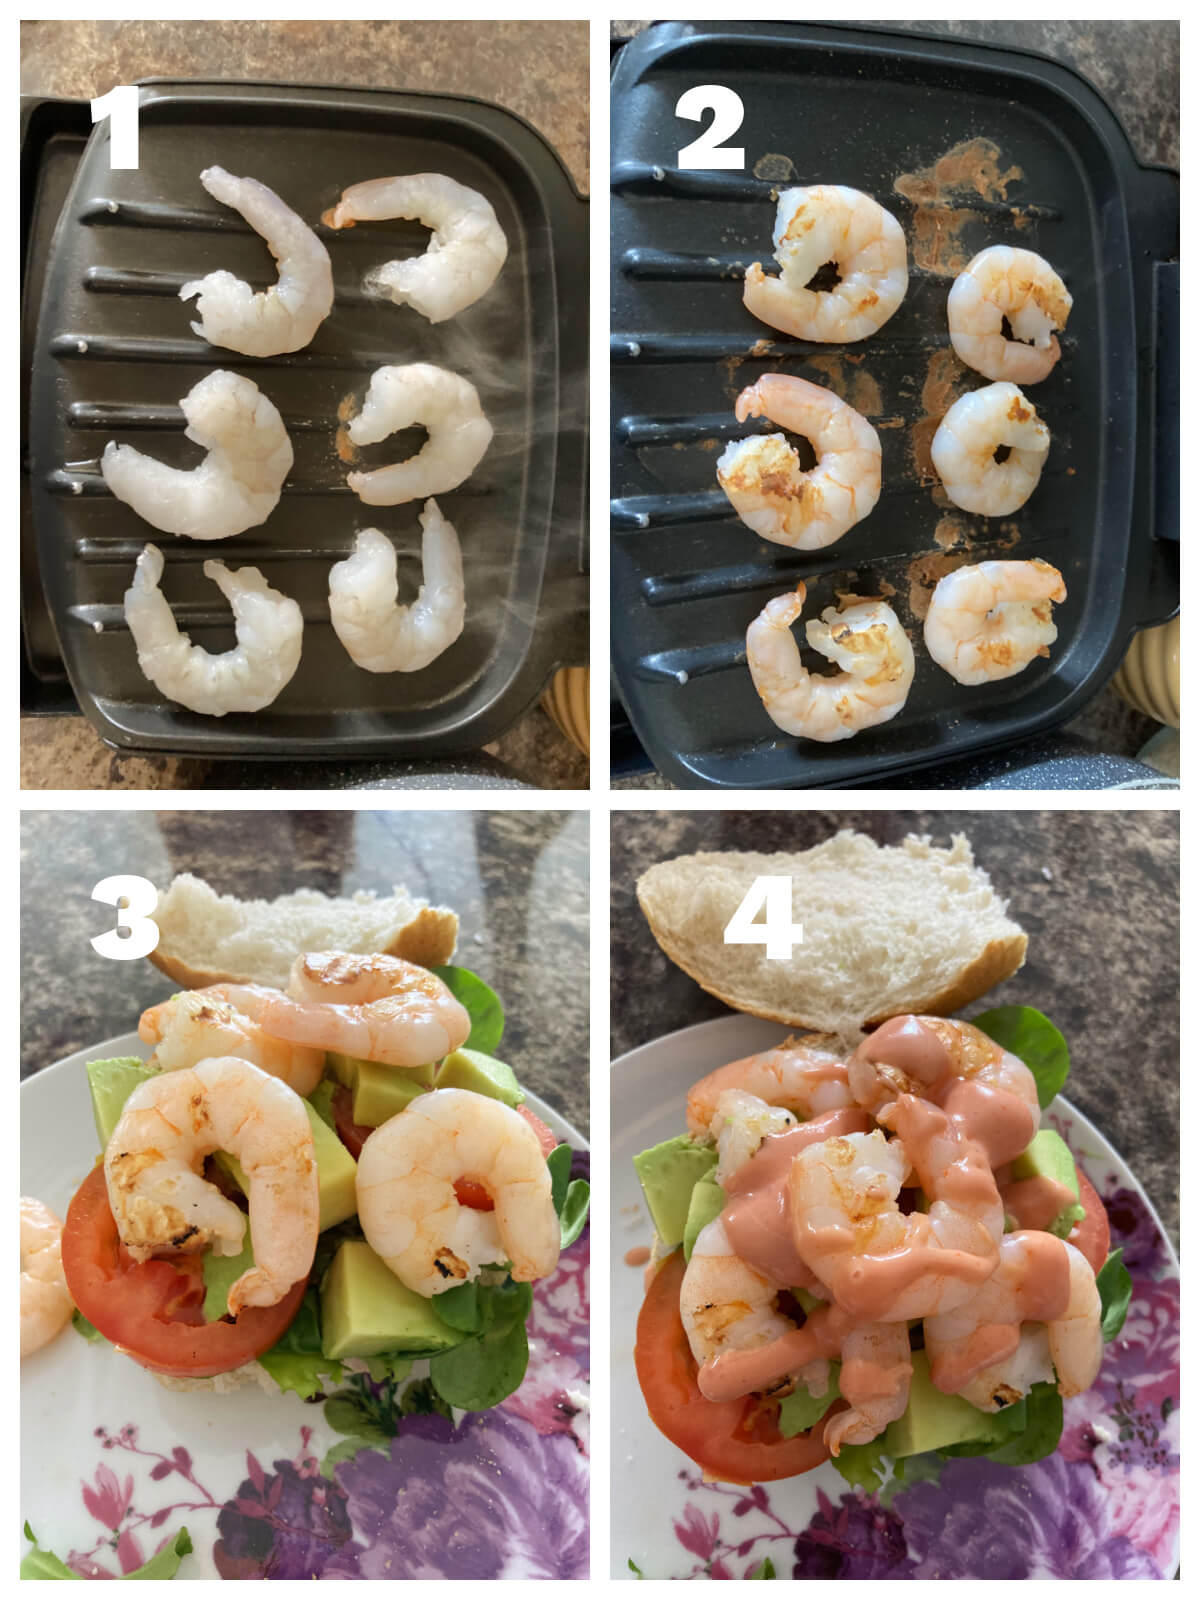 Collage of 4 photos to show how to make prawn burgers.